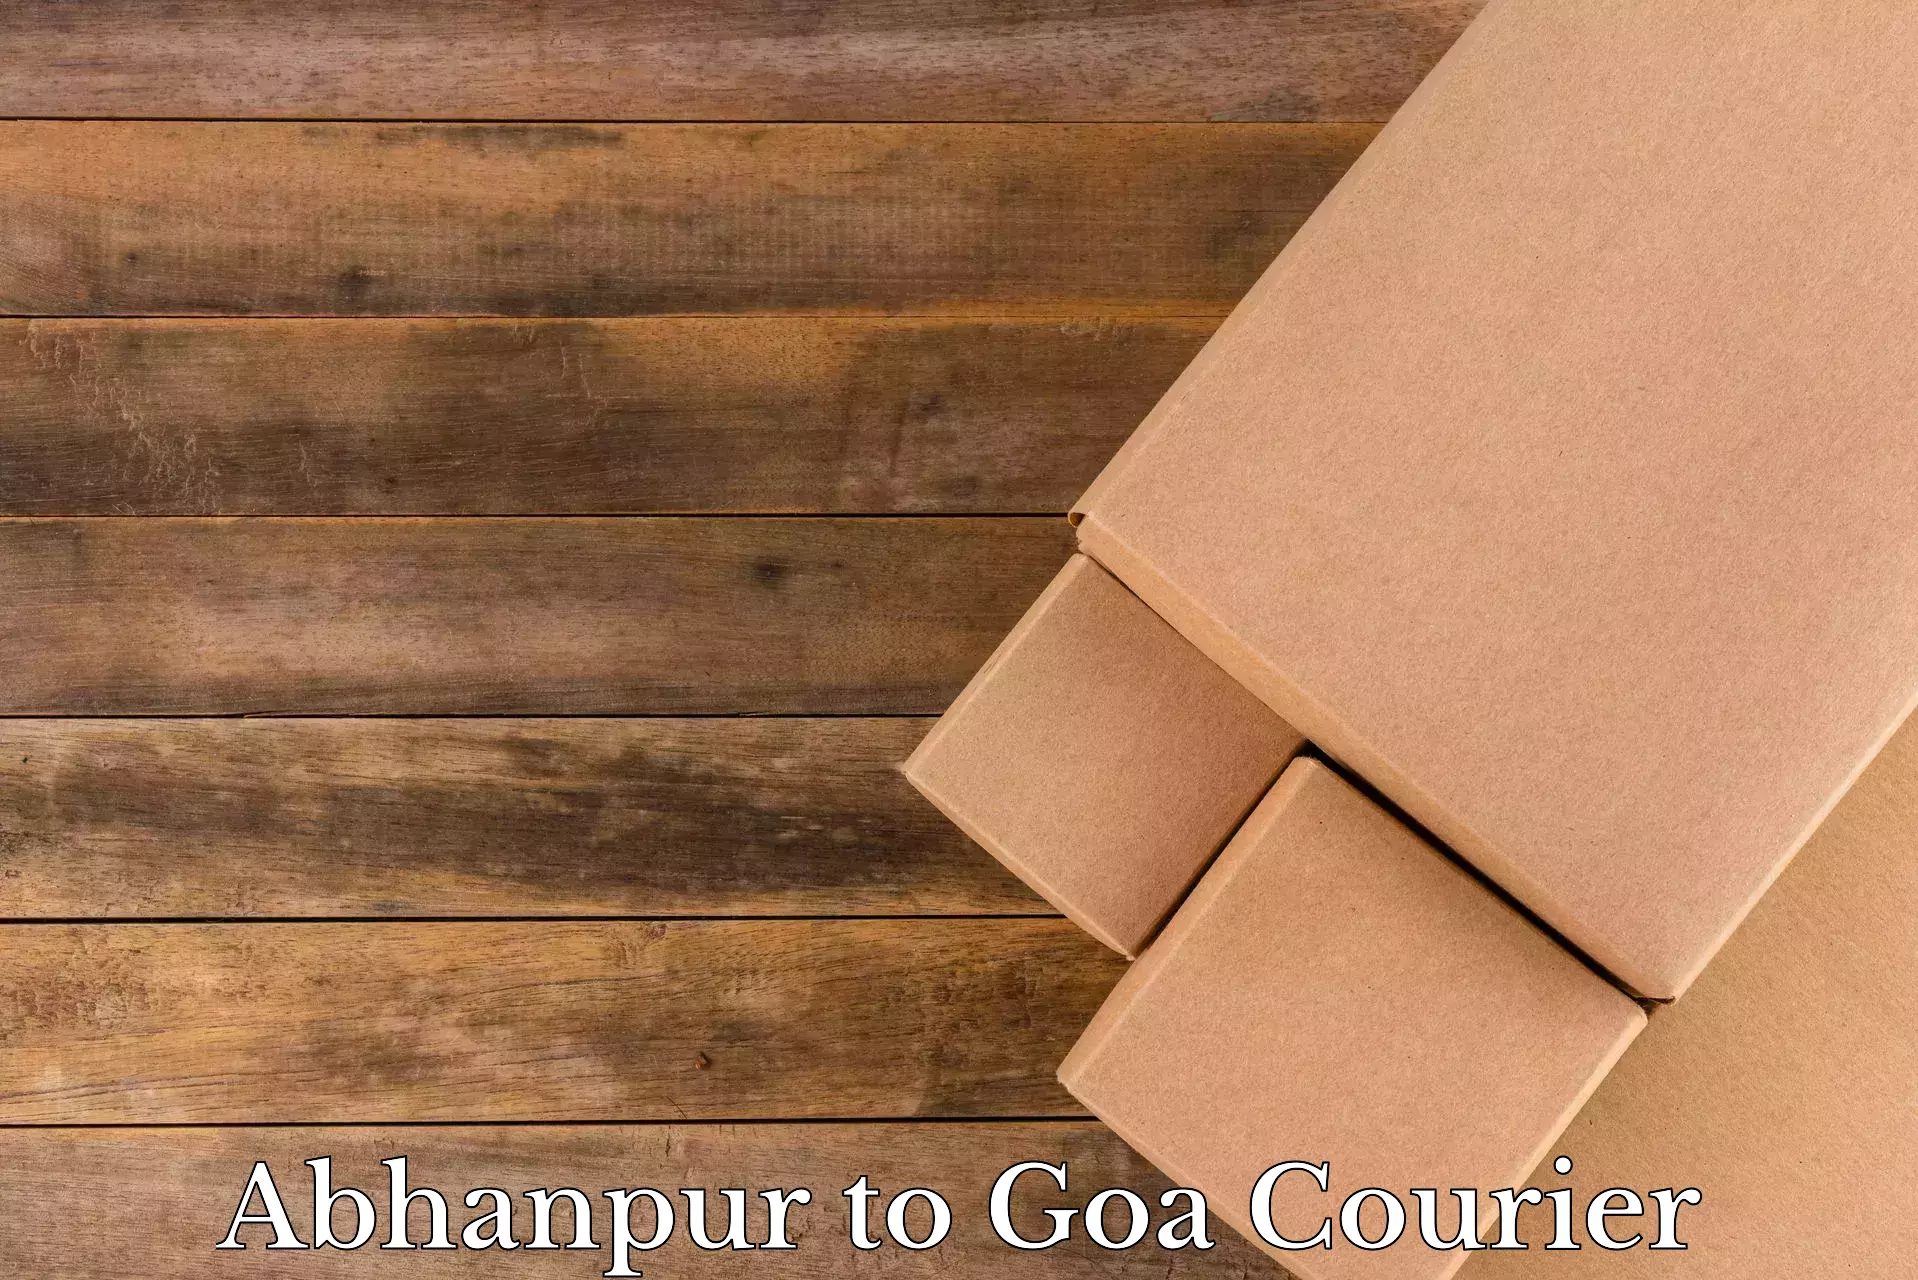 Home relocation experts Abhanpur to Goa